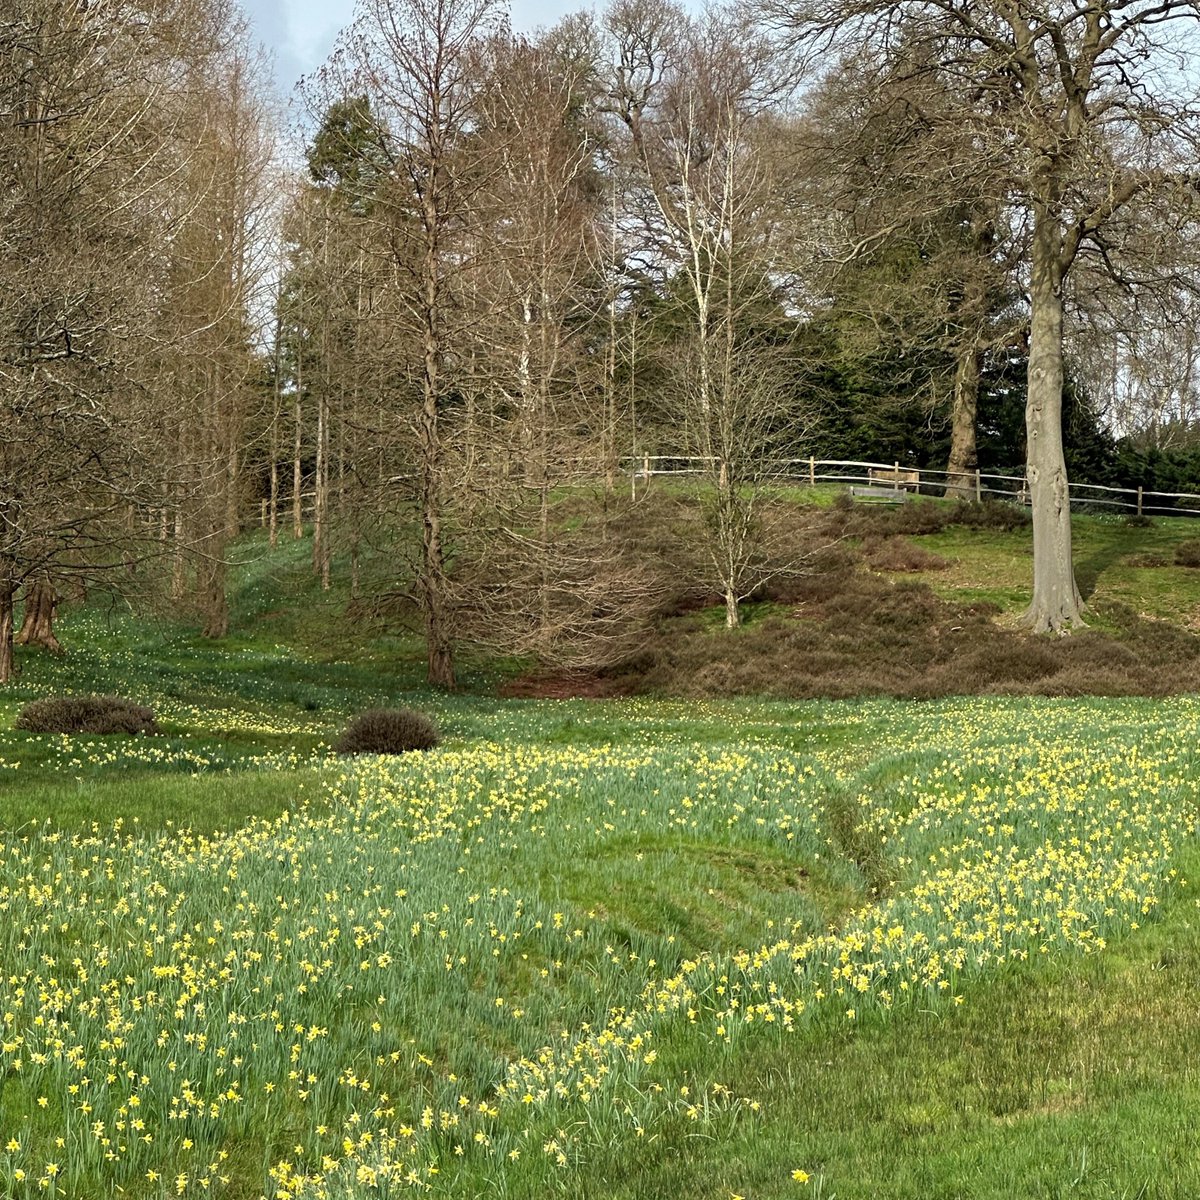 Daffodil Valley in The Valley Gardens is at its peak this week. Take a look at our suggest walk from The Savill Garden & Adventure Play car park, or, download the map here: windsorgreatpark.co.uk/explore/activi…